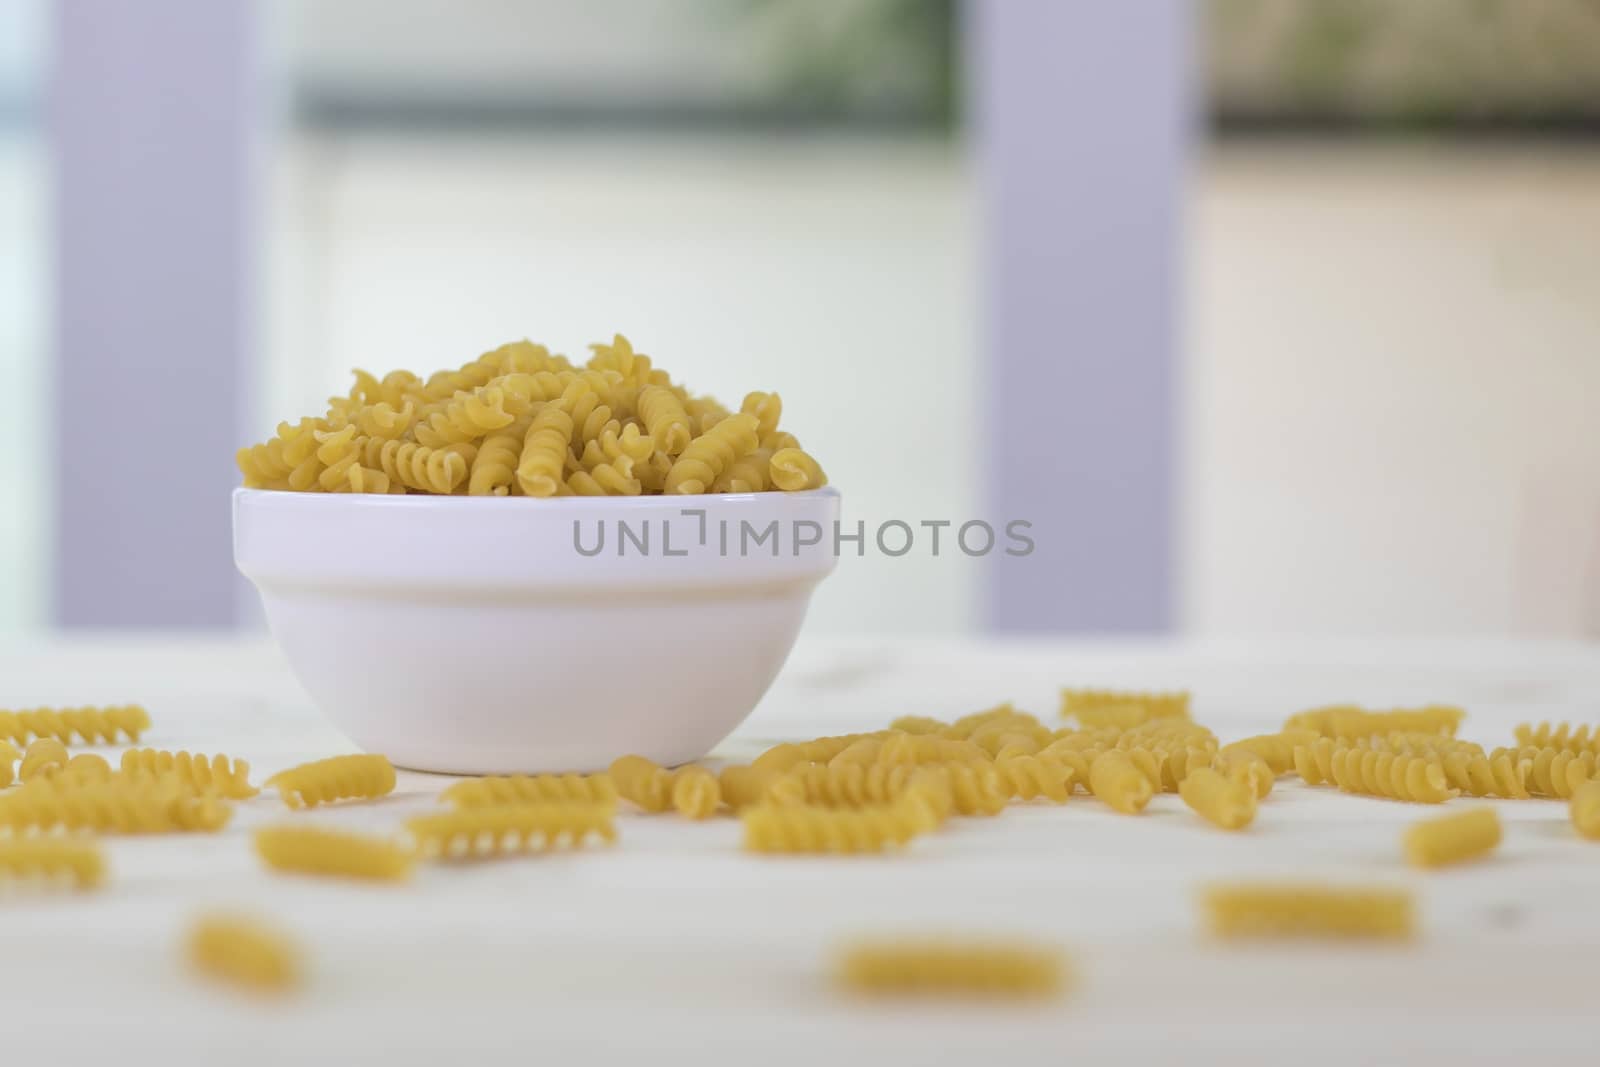 Fusilli in white cups placed on a wooden table.